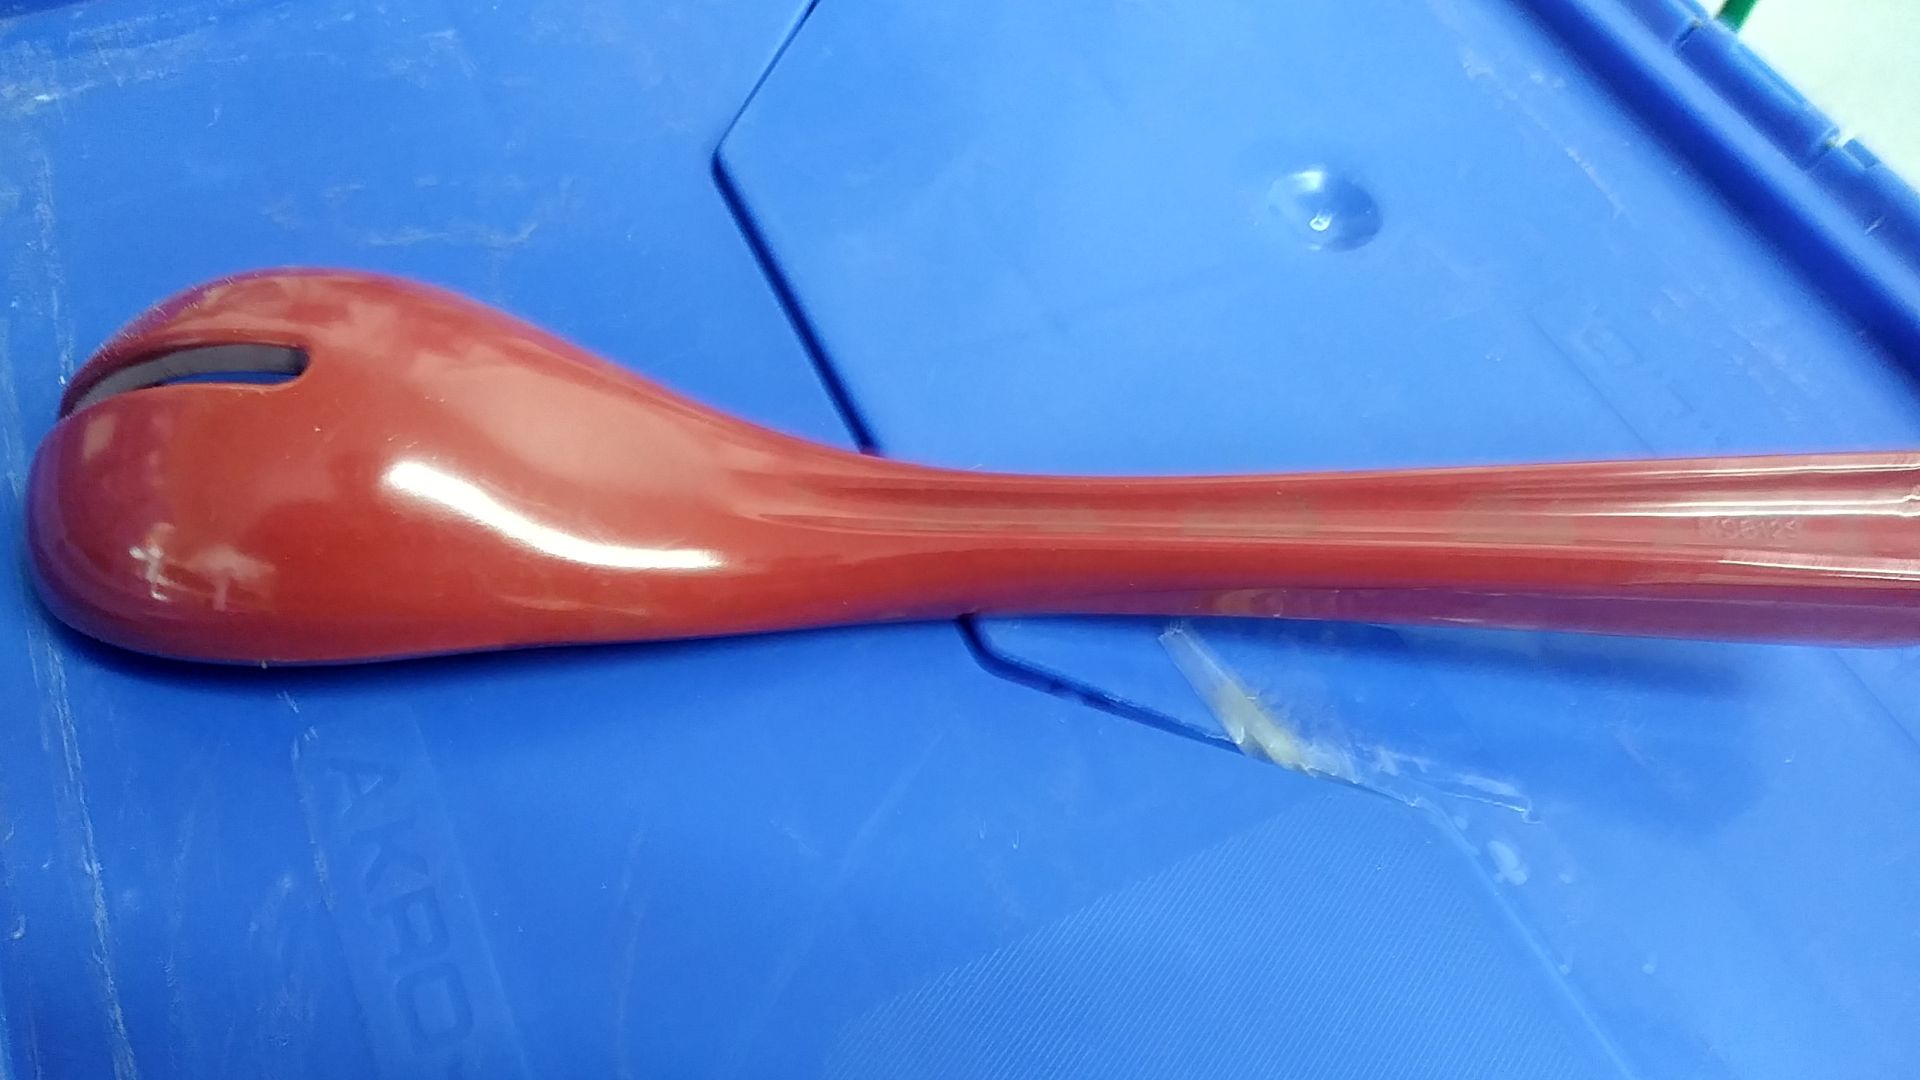 LARGE RED SLOTTED SPOONS (HARD PLASTIC) (APPROX 65 PIECES IN 1 BIN) - Image 2 of 2